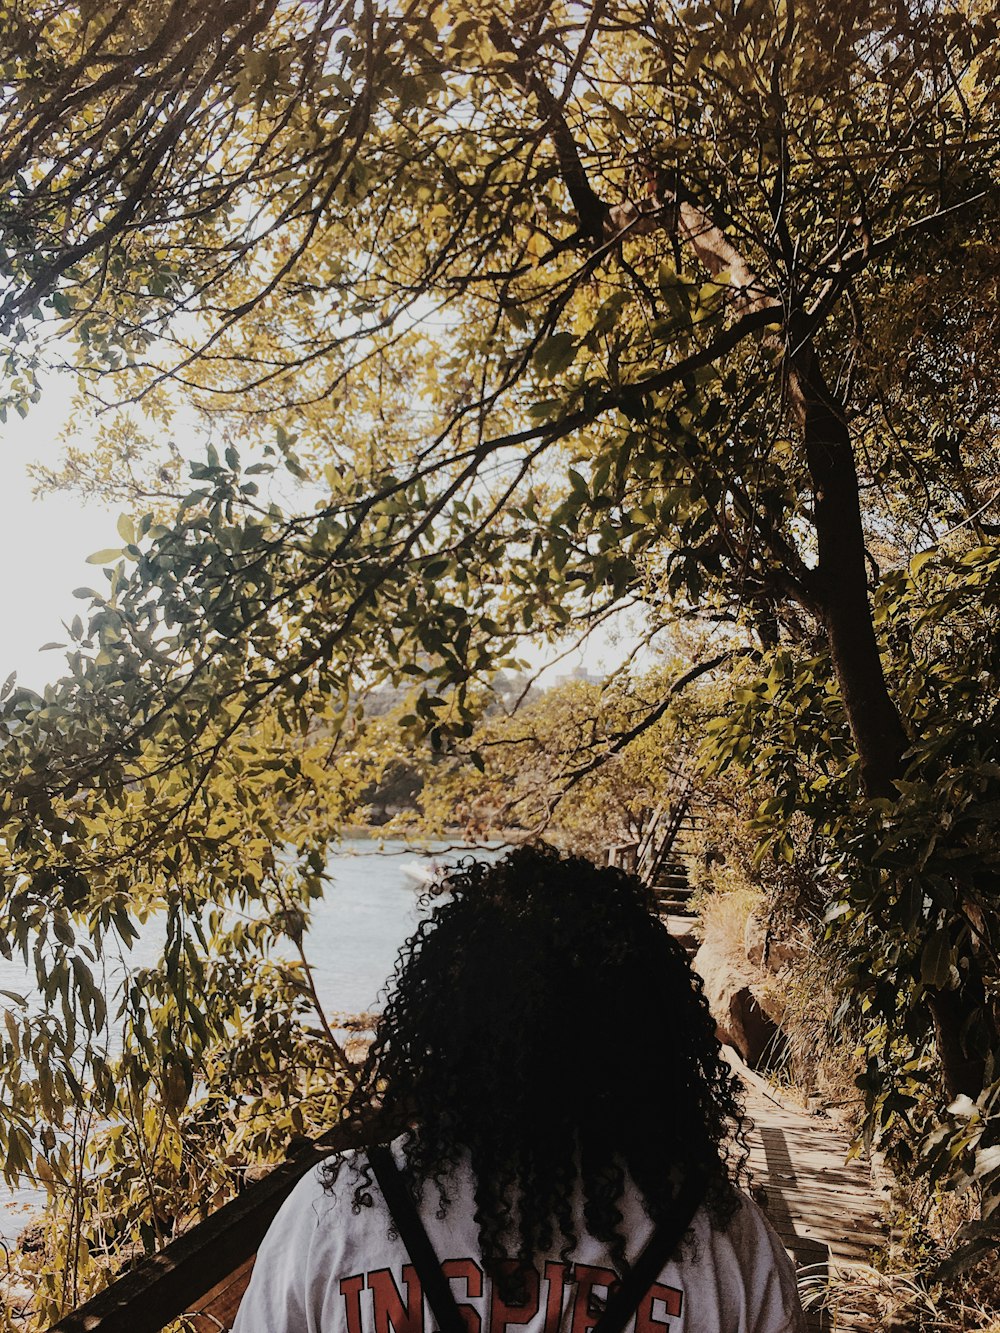 person near trees and body of water